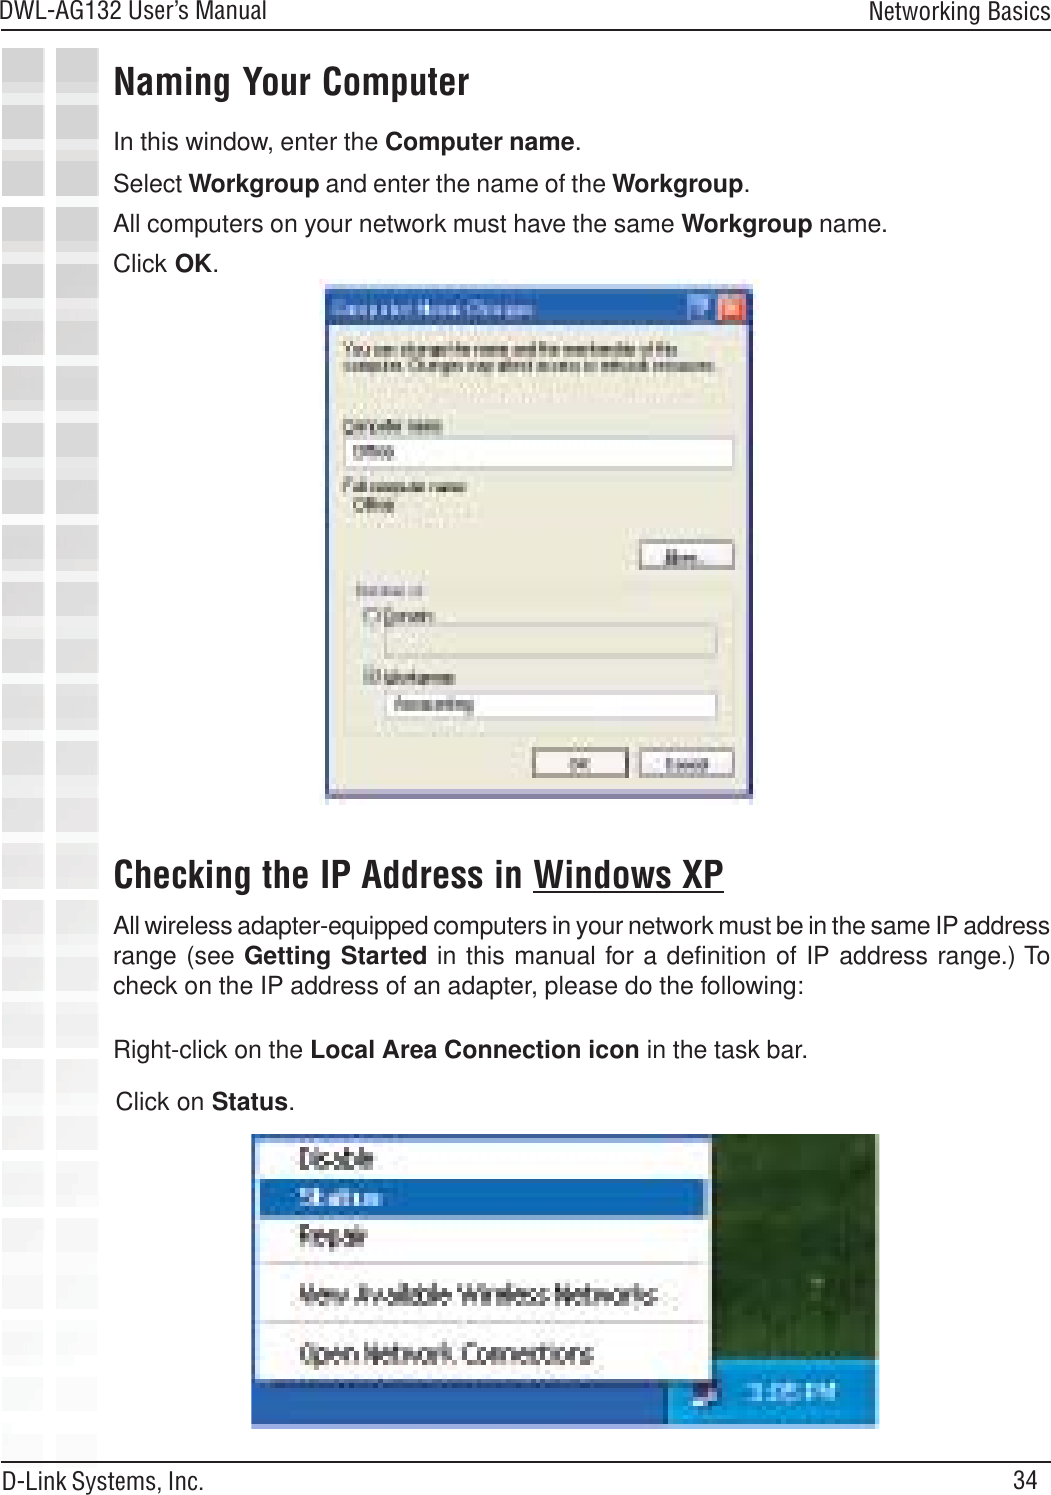 34DWL-AG132 User’s ManualD-Link Systems, Inc.Networking BasicsNaming Your ComputerChecking the IP Address in Windows XPIn this window, enter the Computer name.Select Workgroup and enter the name of the Workgroup.All computers on your network must have the same Workgroup name.Click OK.All wireless adapter-equipped computers in your network must be in the same IP addressrange (see Getting Started in this manual for a definition of IP address range.) Tocheck on the IP address of an adapter, please do the following:Right-click on the Local Area Connection icon in the task bar.Click on Status.